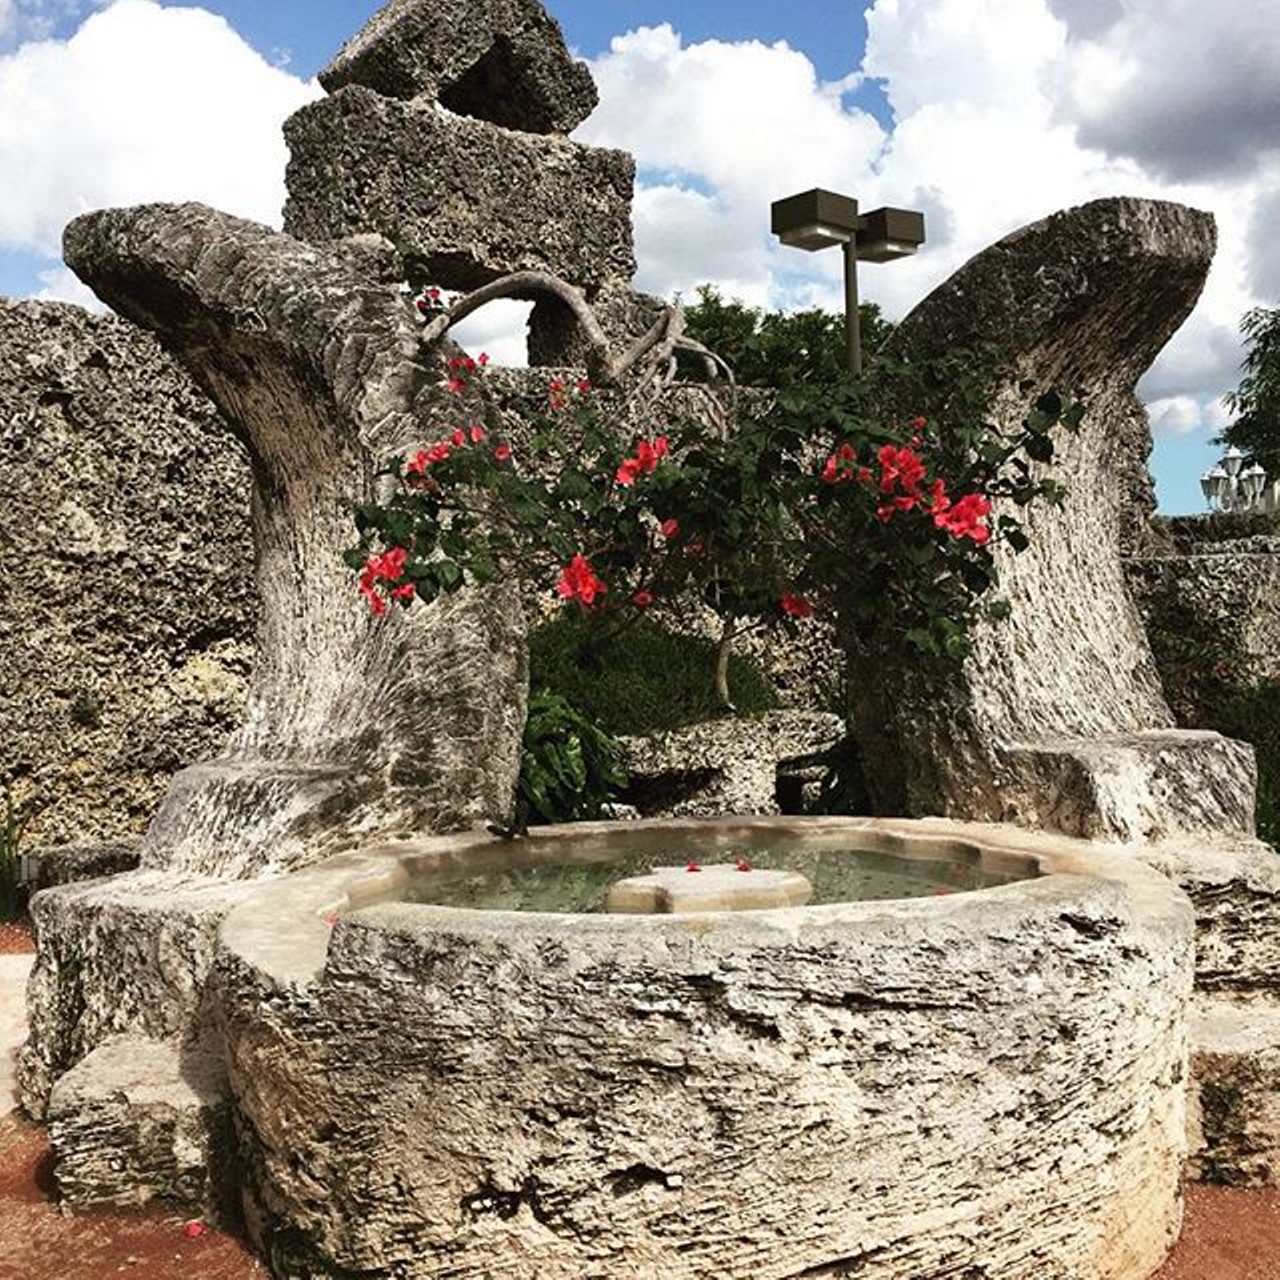 Coral Castle, Homestead
28655 South Dixie Highway, Miami
The drive will be worth the end result with this one - take a road trip down to Miami and experience Coral Castle Museum, a sculpture garden of stone made to look like a castle. There's a very uncomfortable mother-in-law chair for your favorite relative. 
Photo via pvnbbr on Instagram